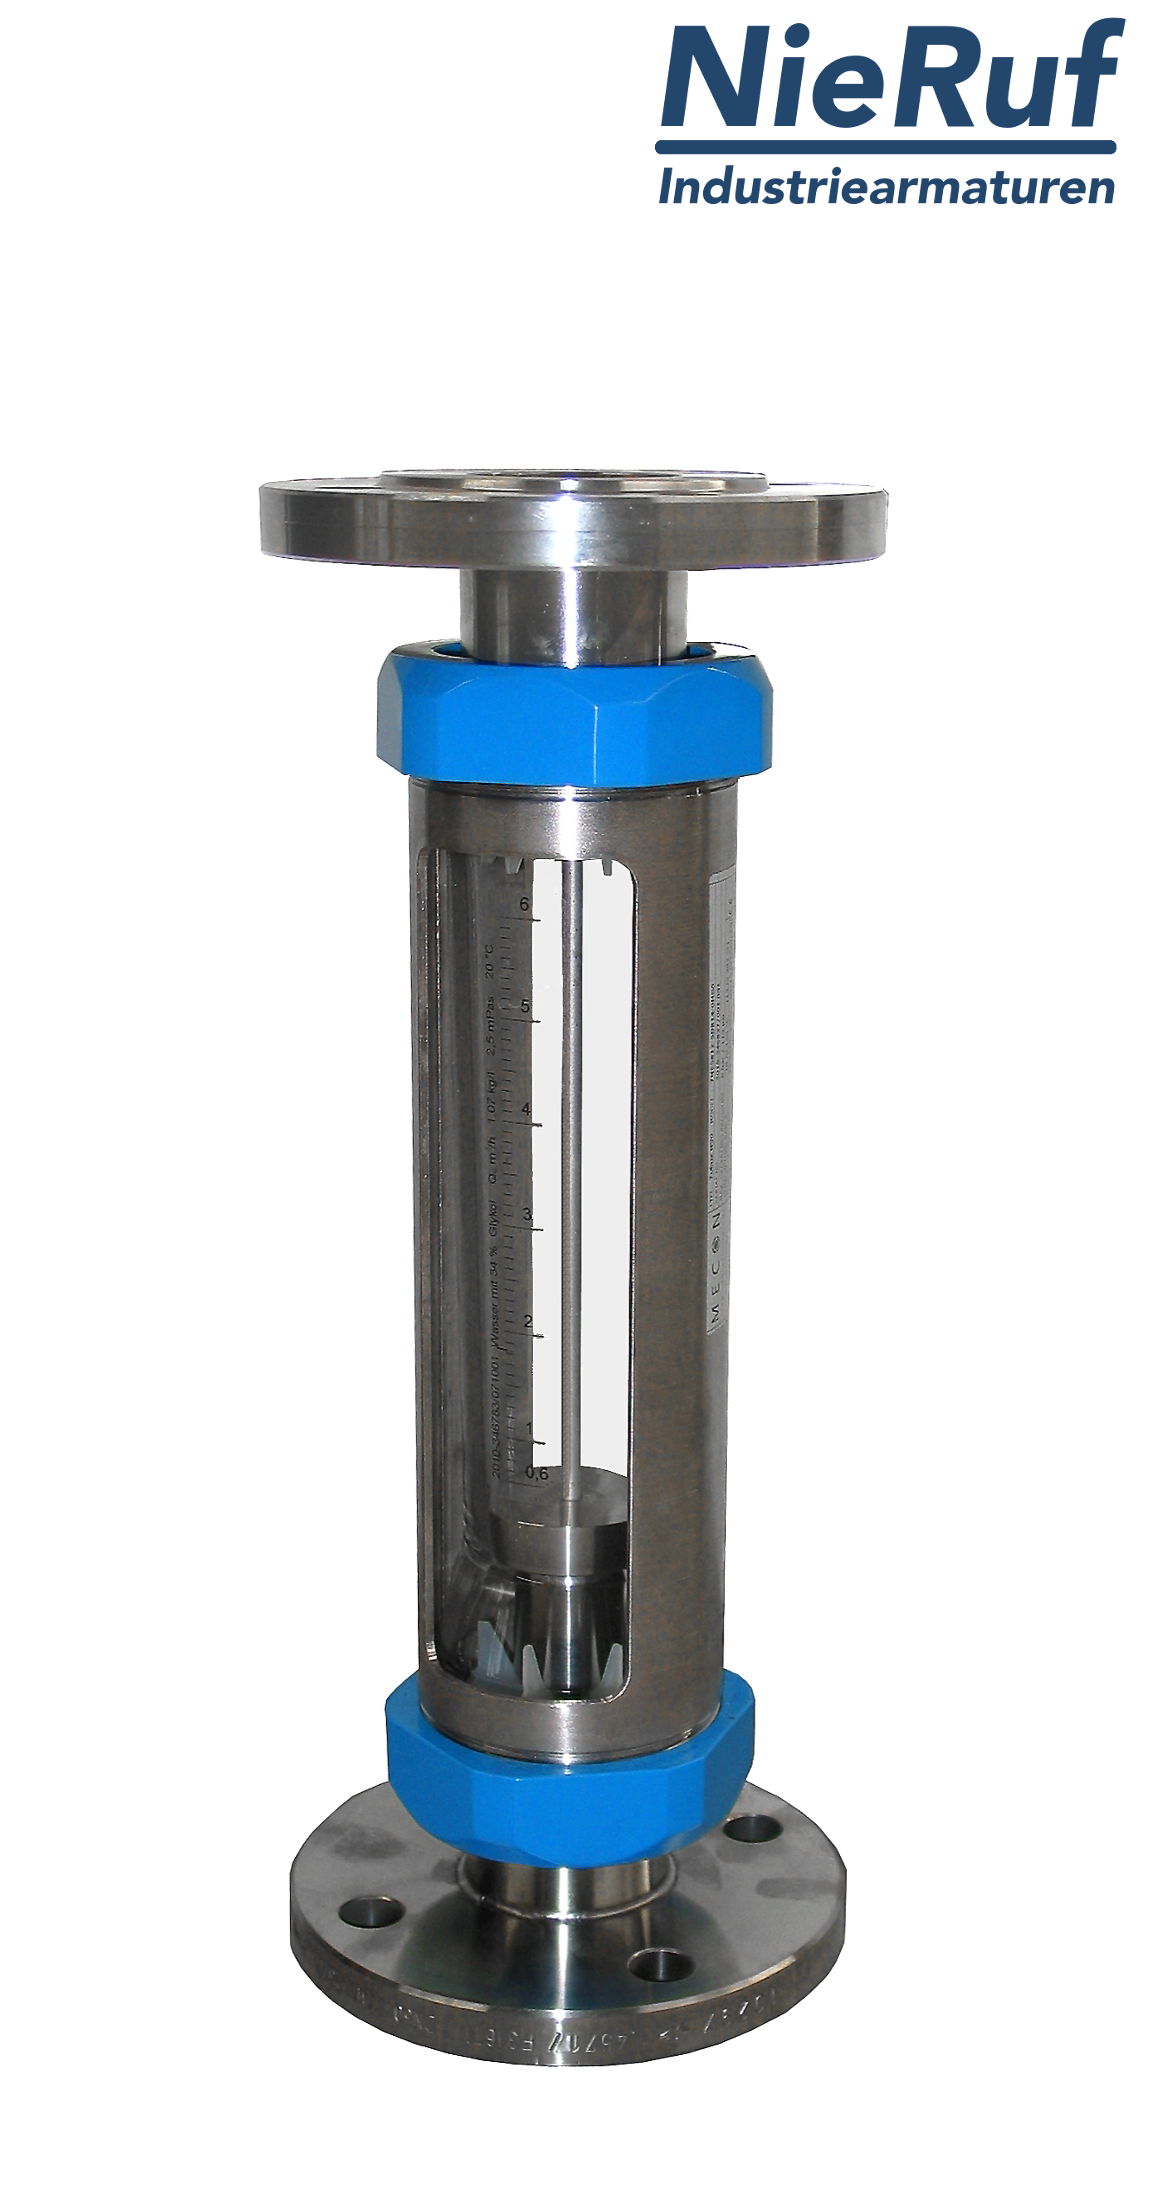 Variable area flowmeter stainless steel + borosilicate flange DN40 2000.0 - 12500 l/h water FKM